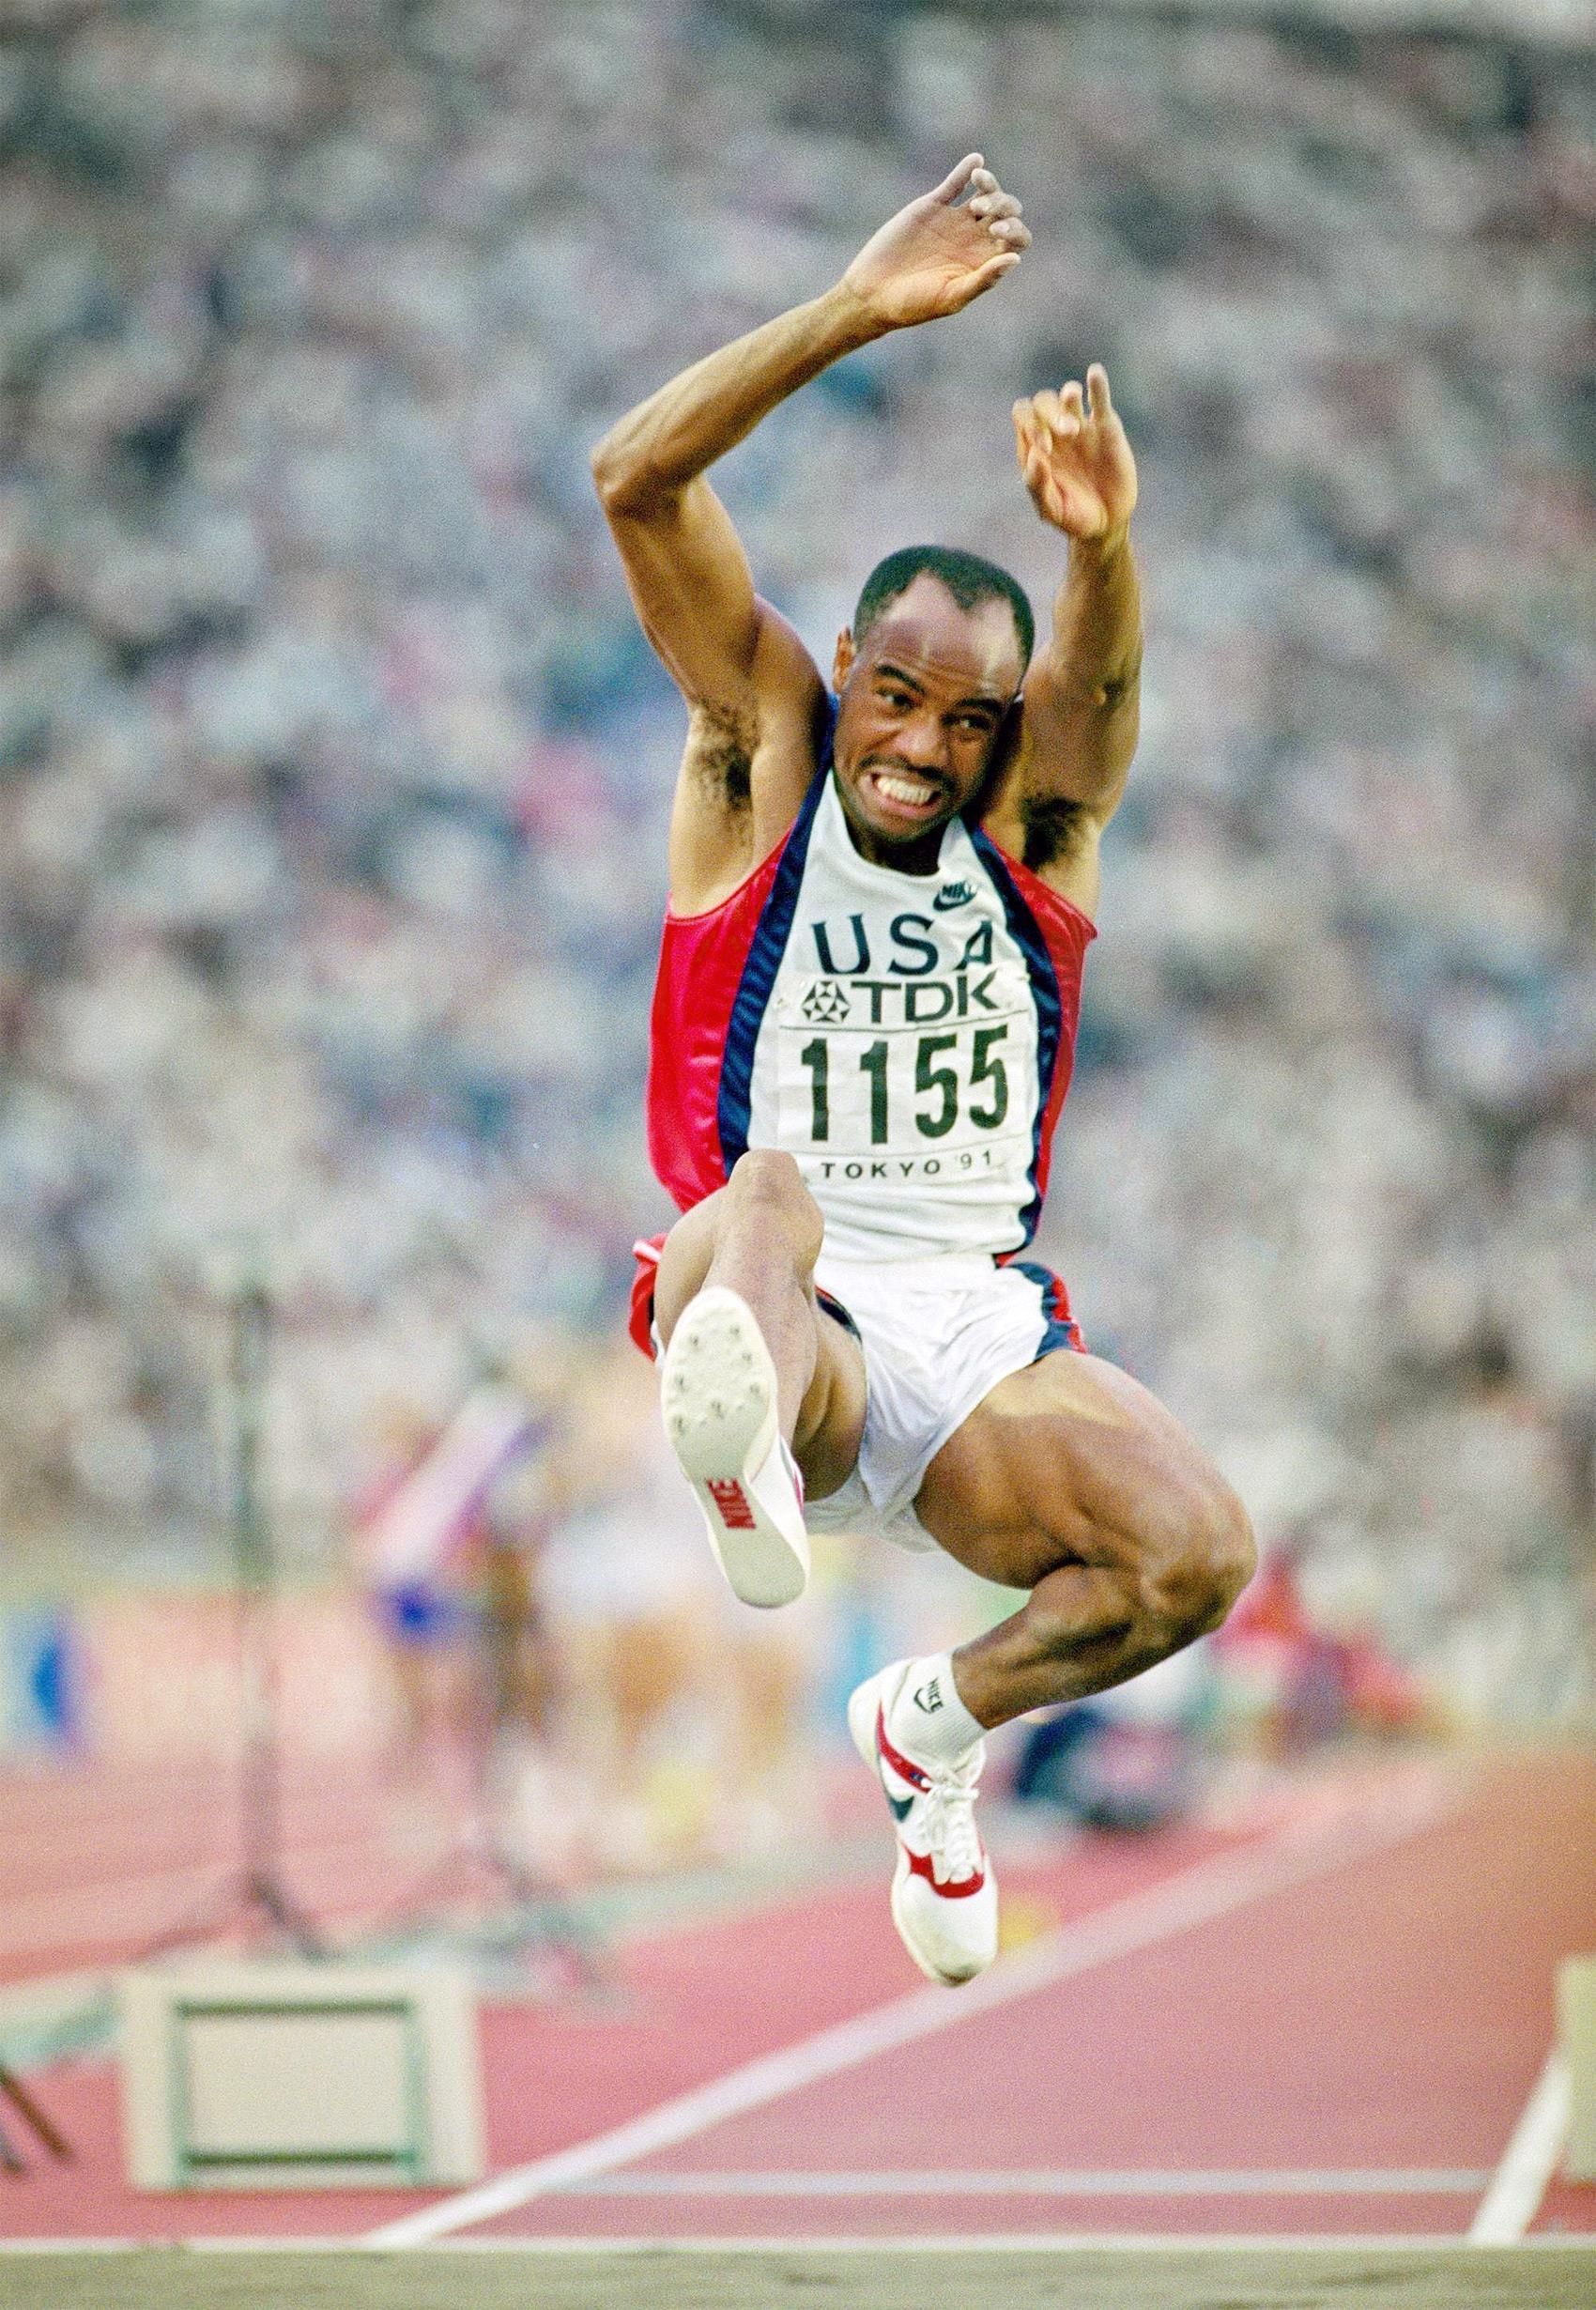 Mike Powell sails to his 8.95m world record leap at the 1991 World Championships in Tokyo